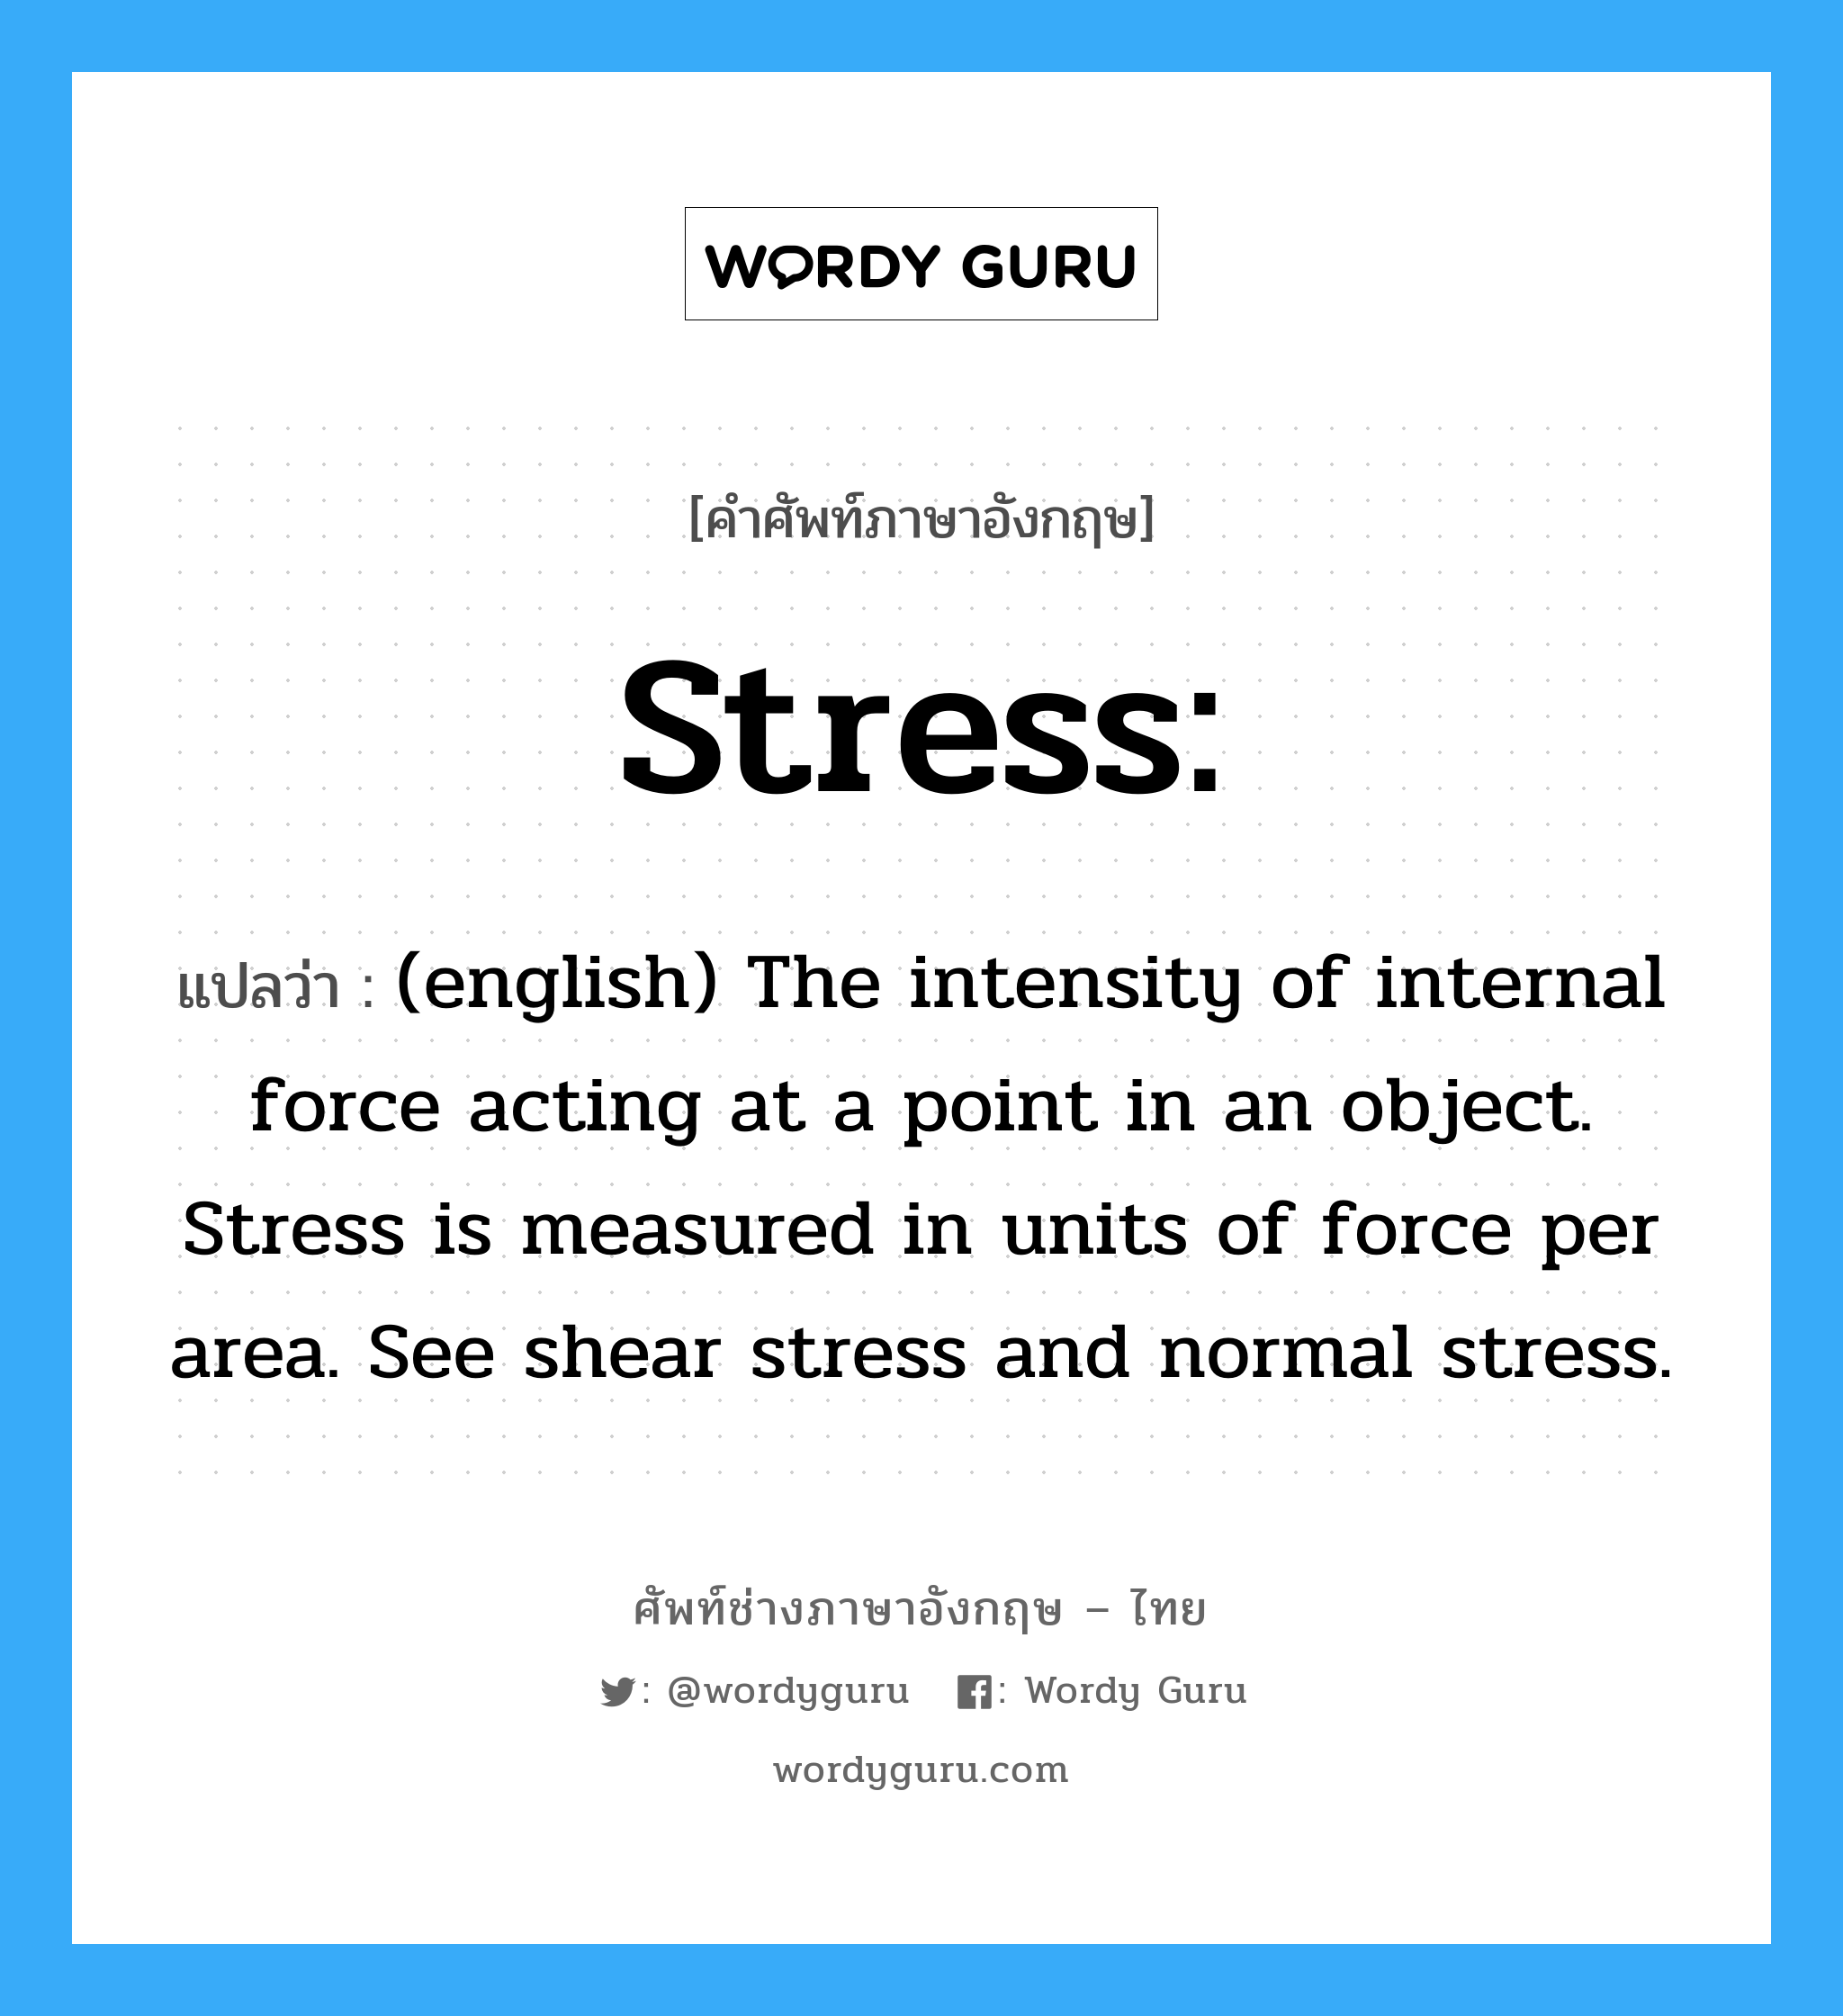 Stress: แปลว่า?, คำศัพท์ช่างภาษาอังกฤษ - ไทย Stress: คำศัพท์ภาษาอังกฤษ Stress: แปลว่า (english) The intensity of internal force acting at a point in an object. Stress is measured in units of force per area. See shear stress and normal stress.